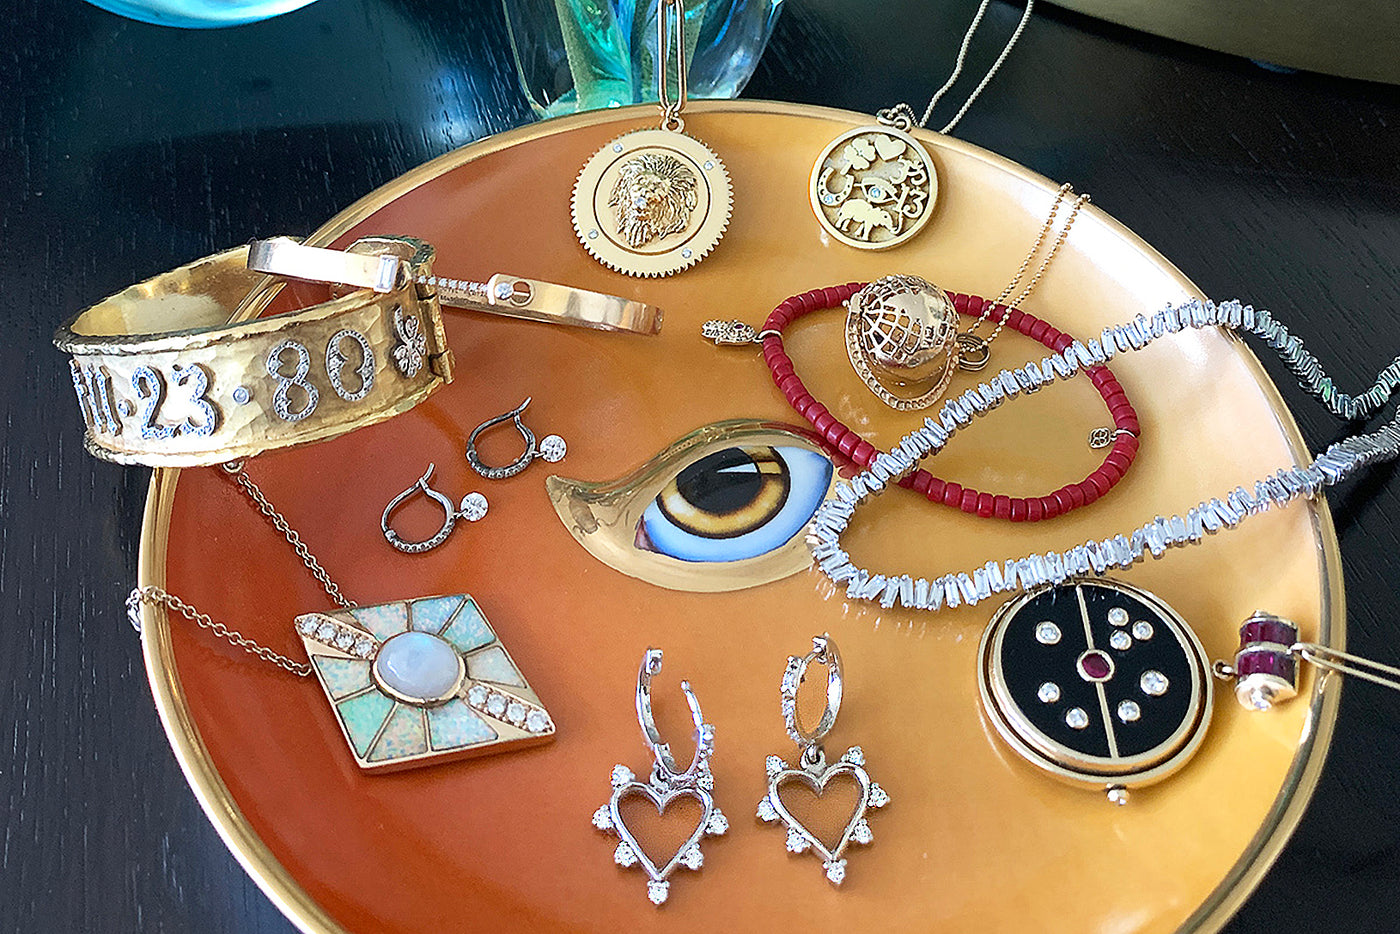 INSIDER SECRETS TO KEEP JEWELRY CLEAN AND HAPPY!